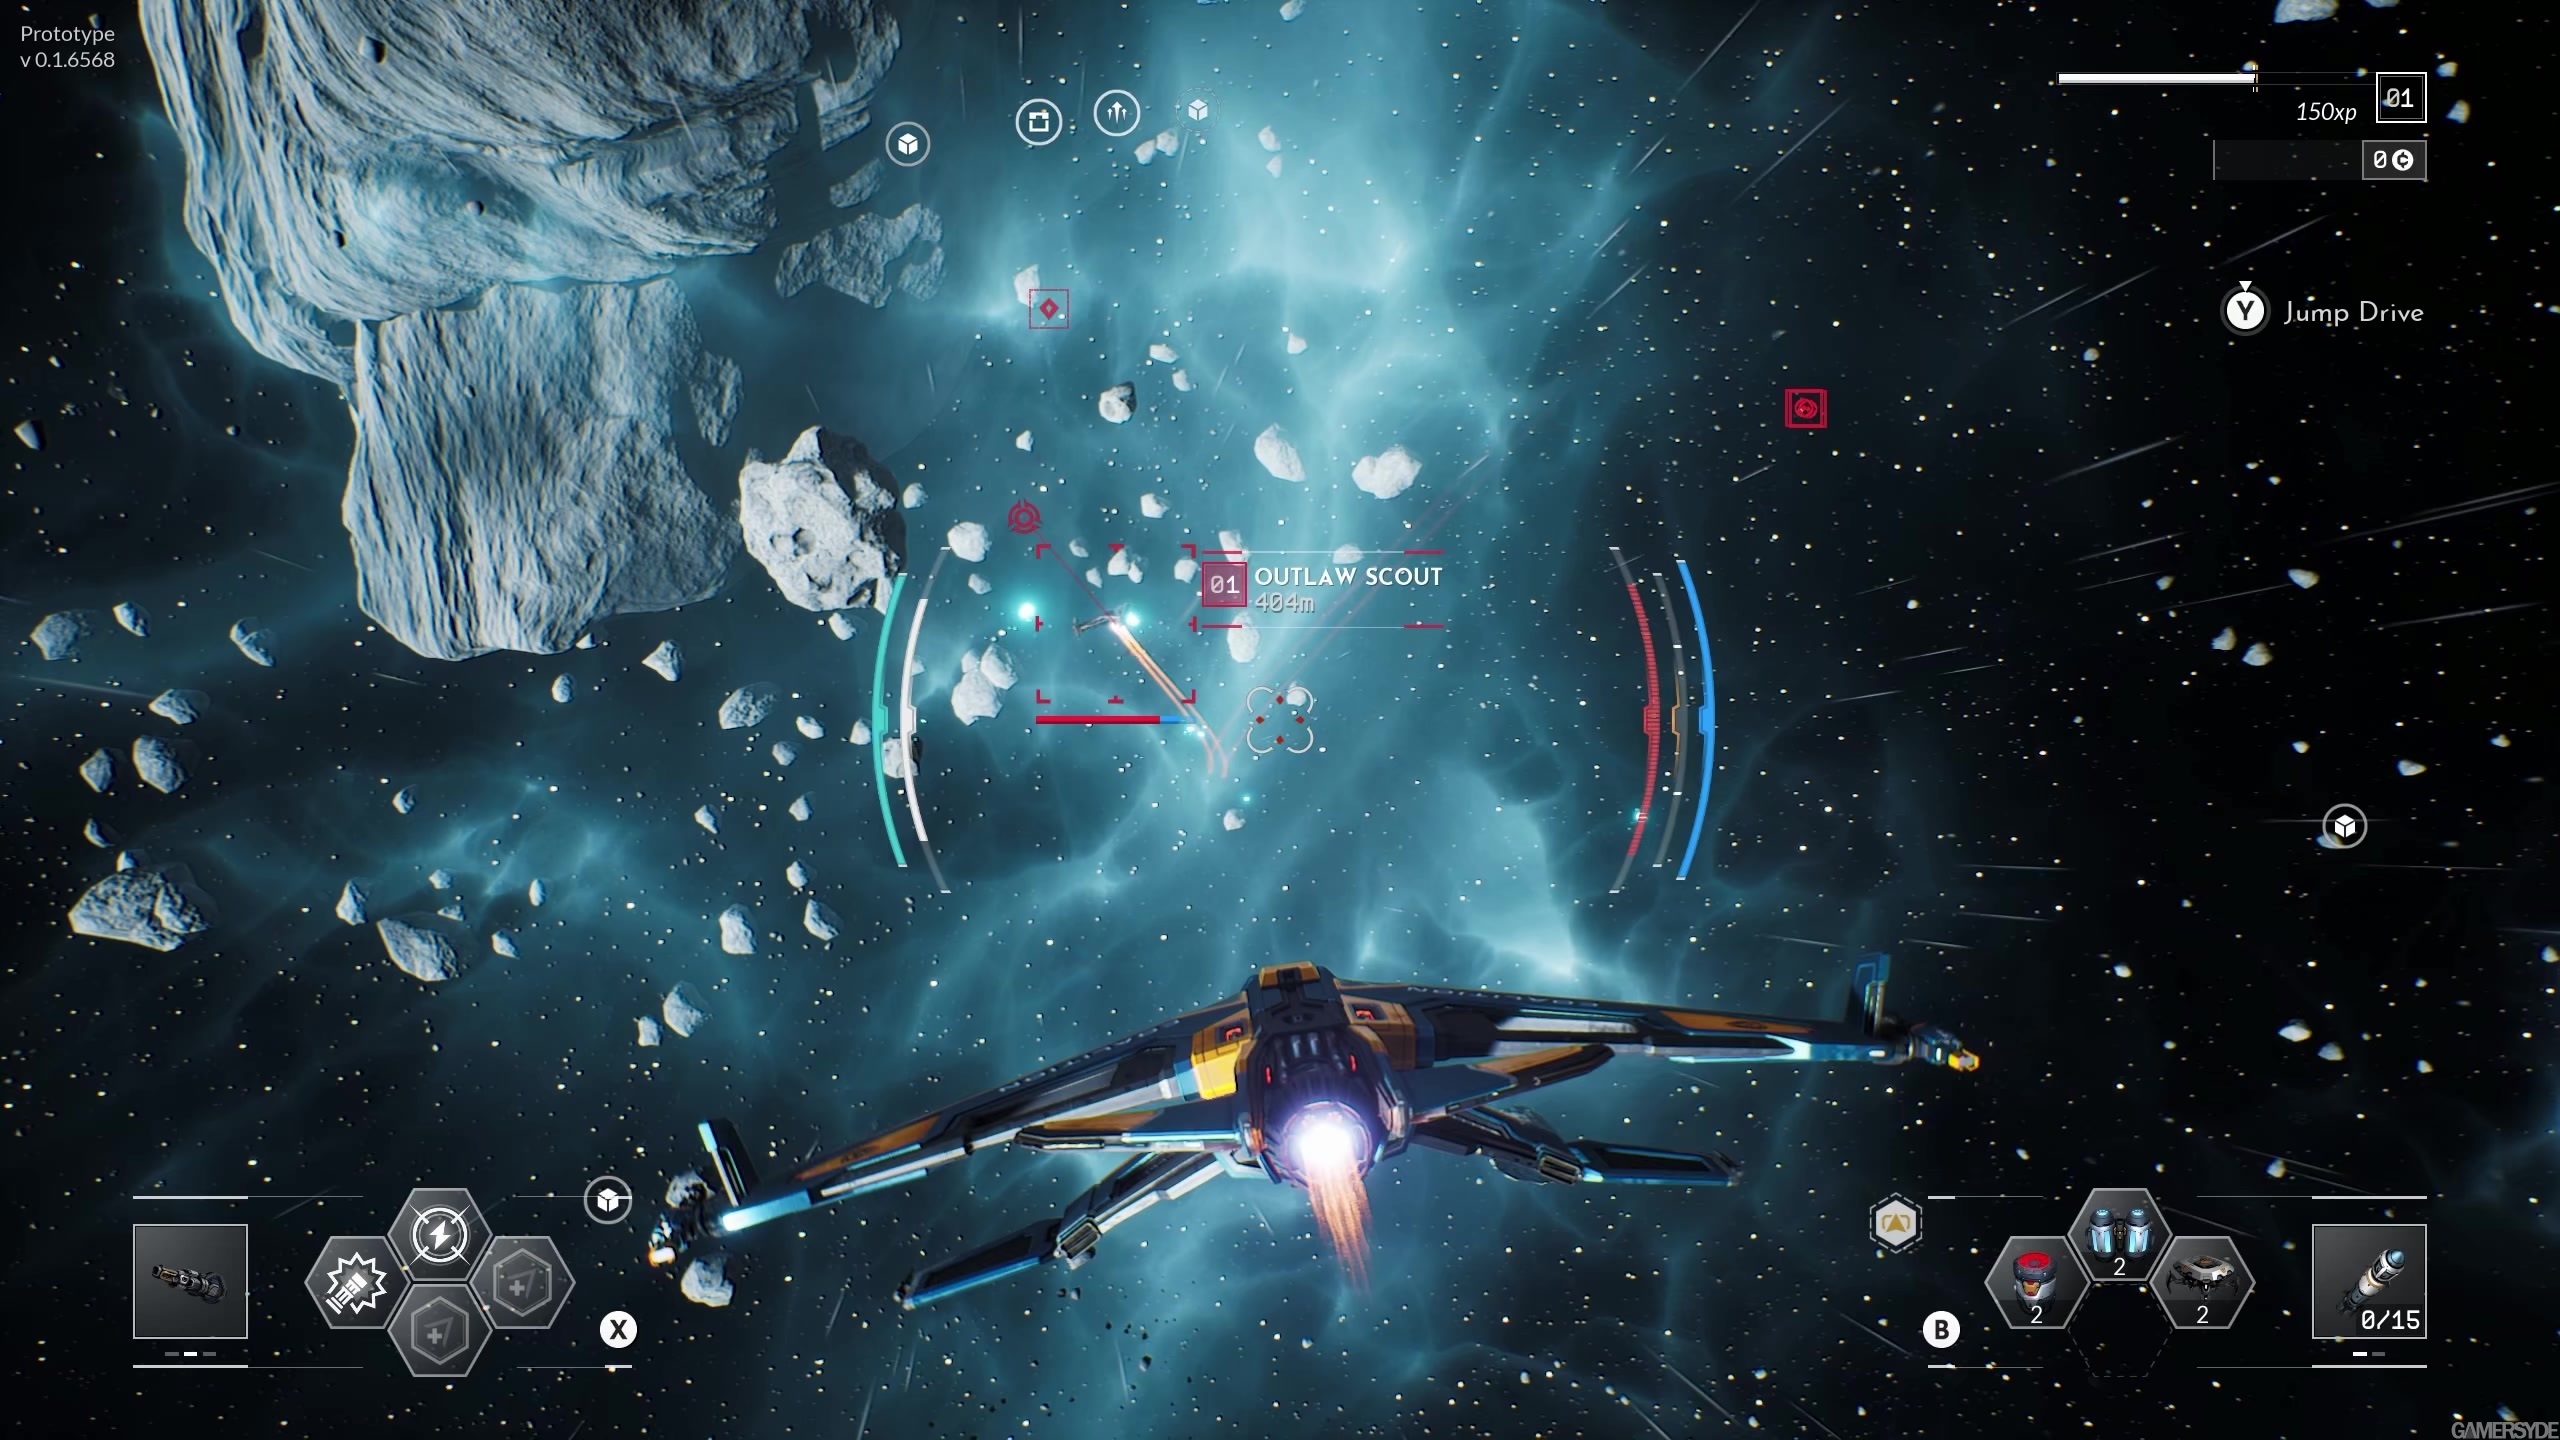 Everspace 2 - Prototype gameplay - High quality stream and download - Gamersyde